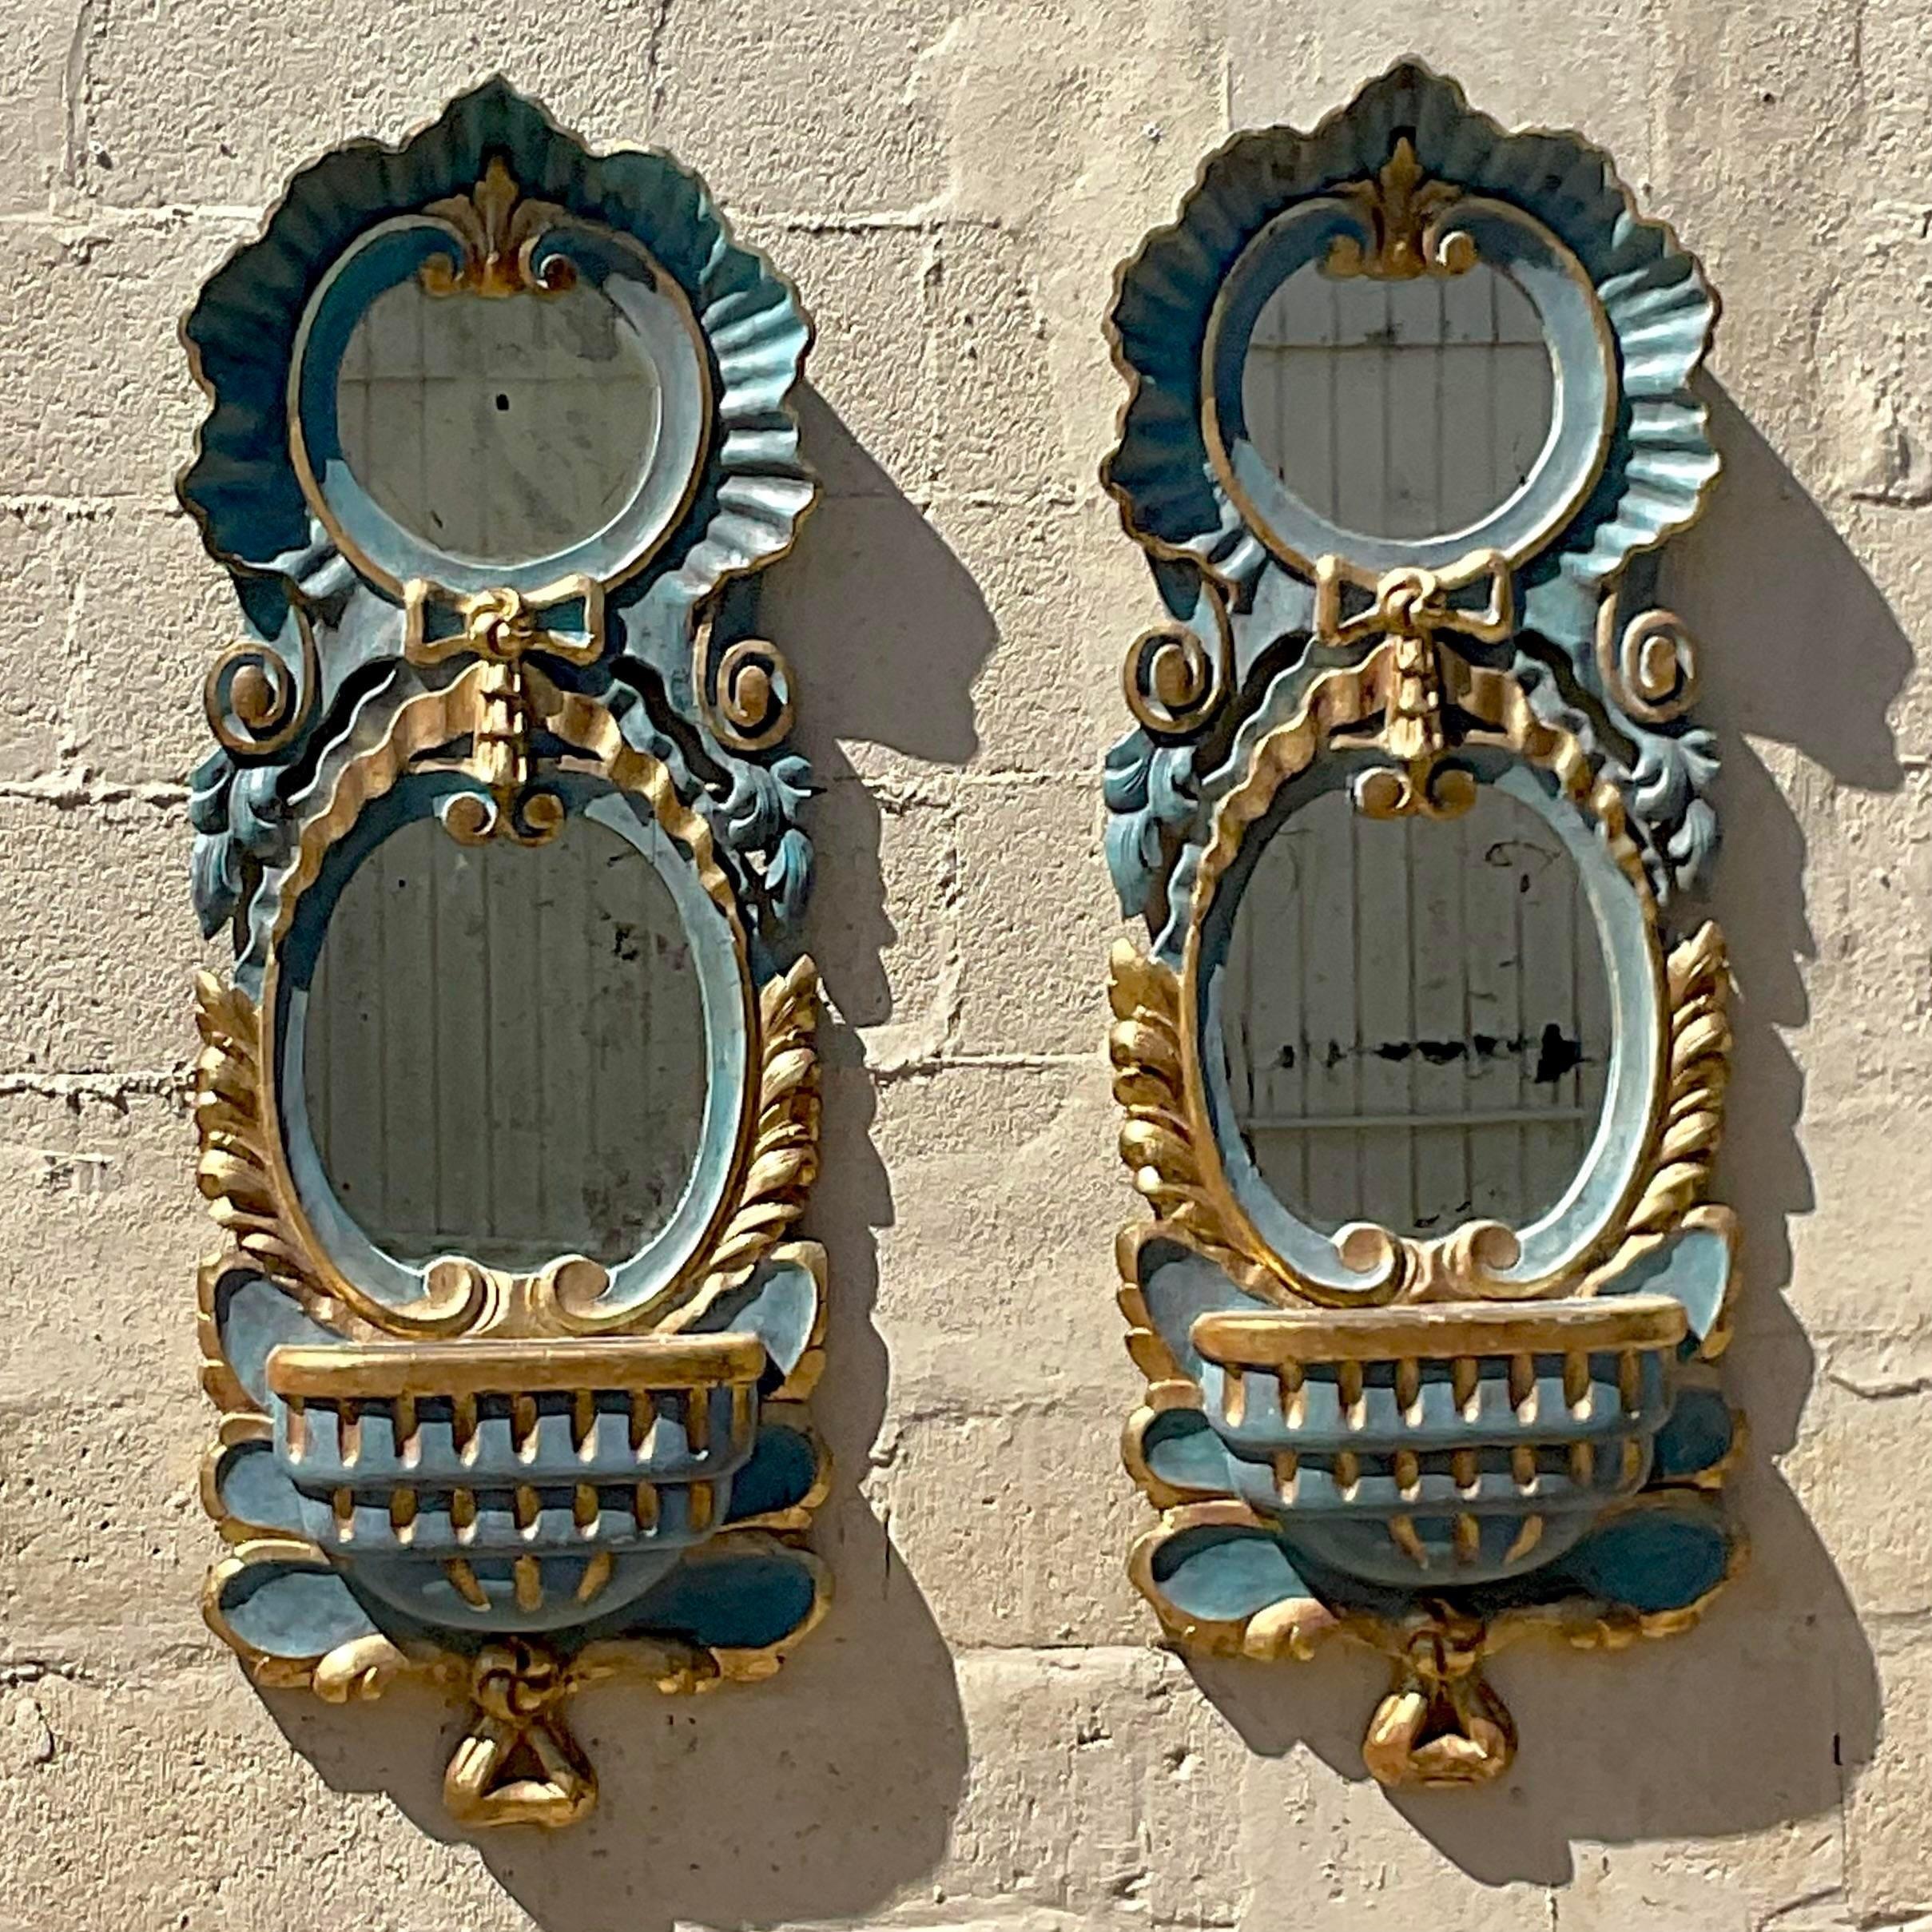 An exceptional pair of vintage Regency mirrors. Made by the Iconic Chapman group. Made in Spain with beautiful gilt tipped edges over a cool blue. Small shelf for your treasured objet, or just your keys! You decide! Acquired from a Palm a each